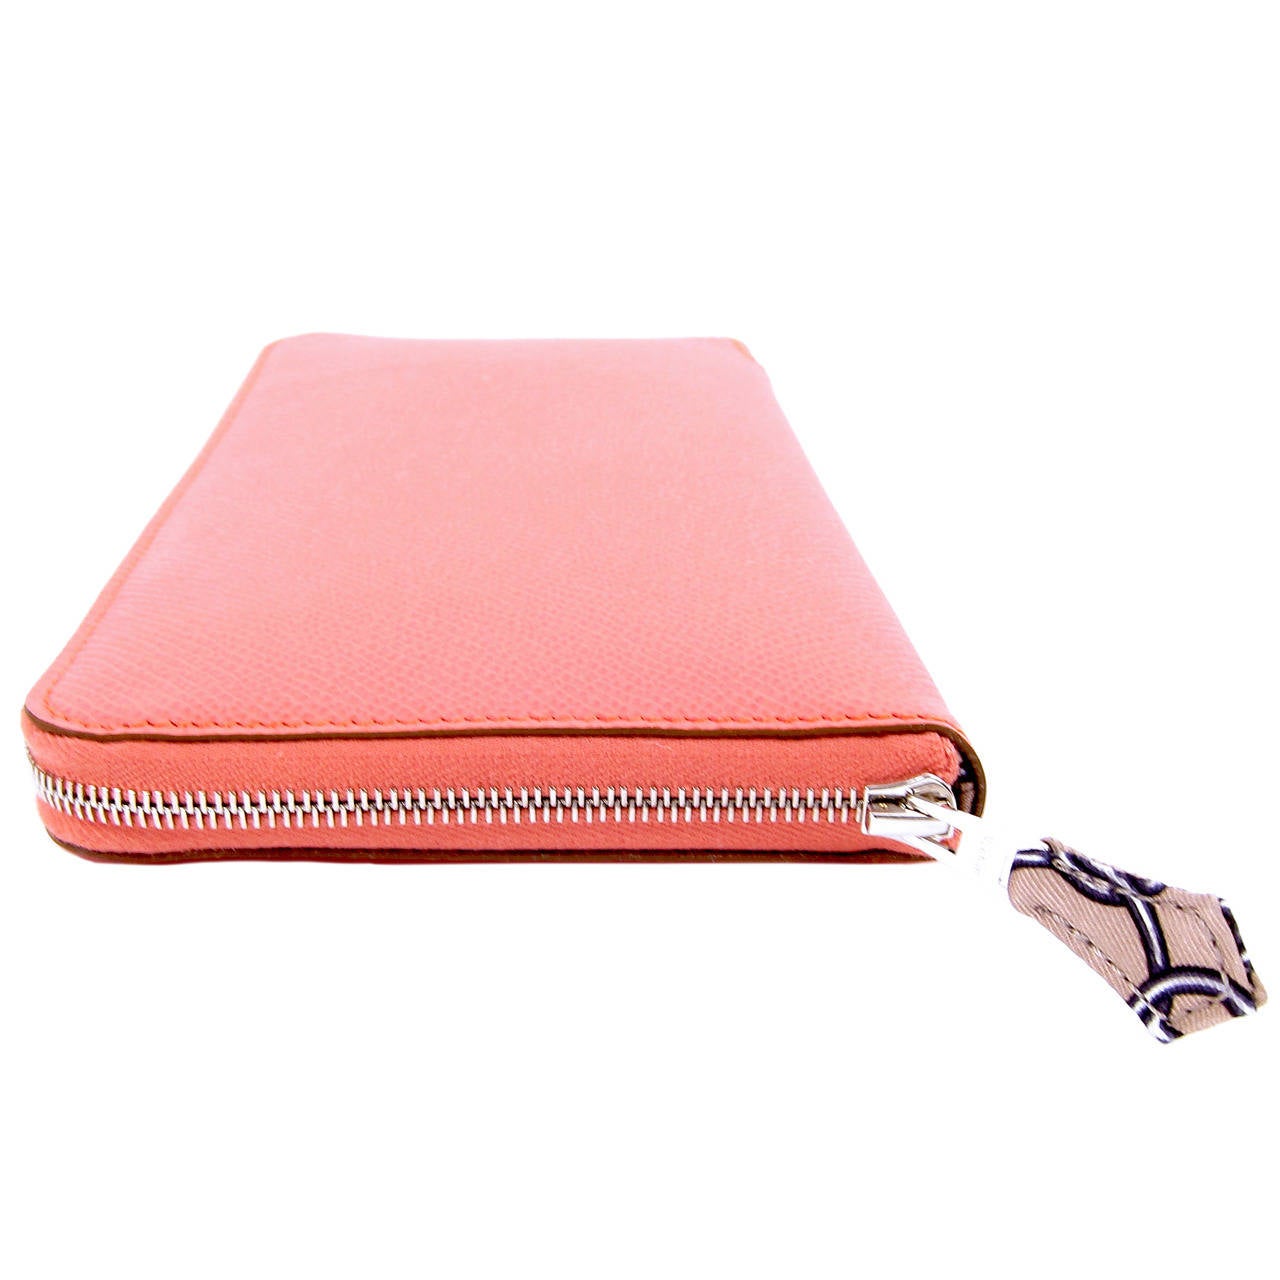 Chicjoy Wallets and Small Accessories - New York, NY 10003 - 1stdibs  